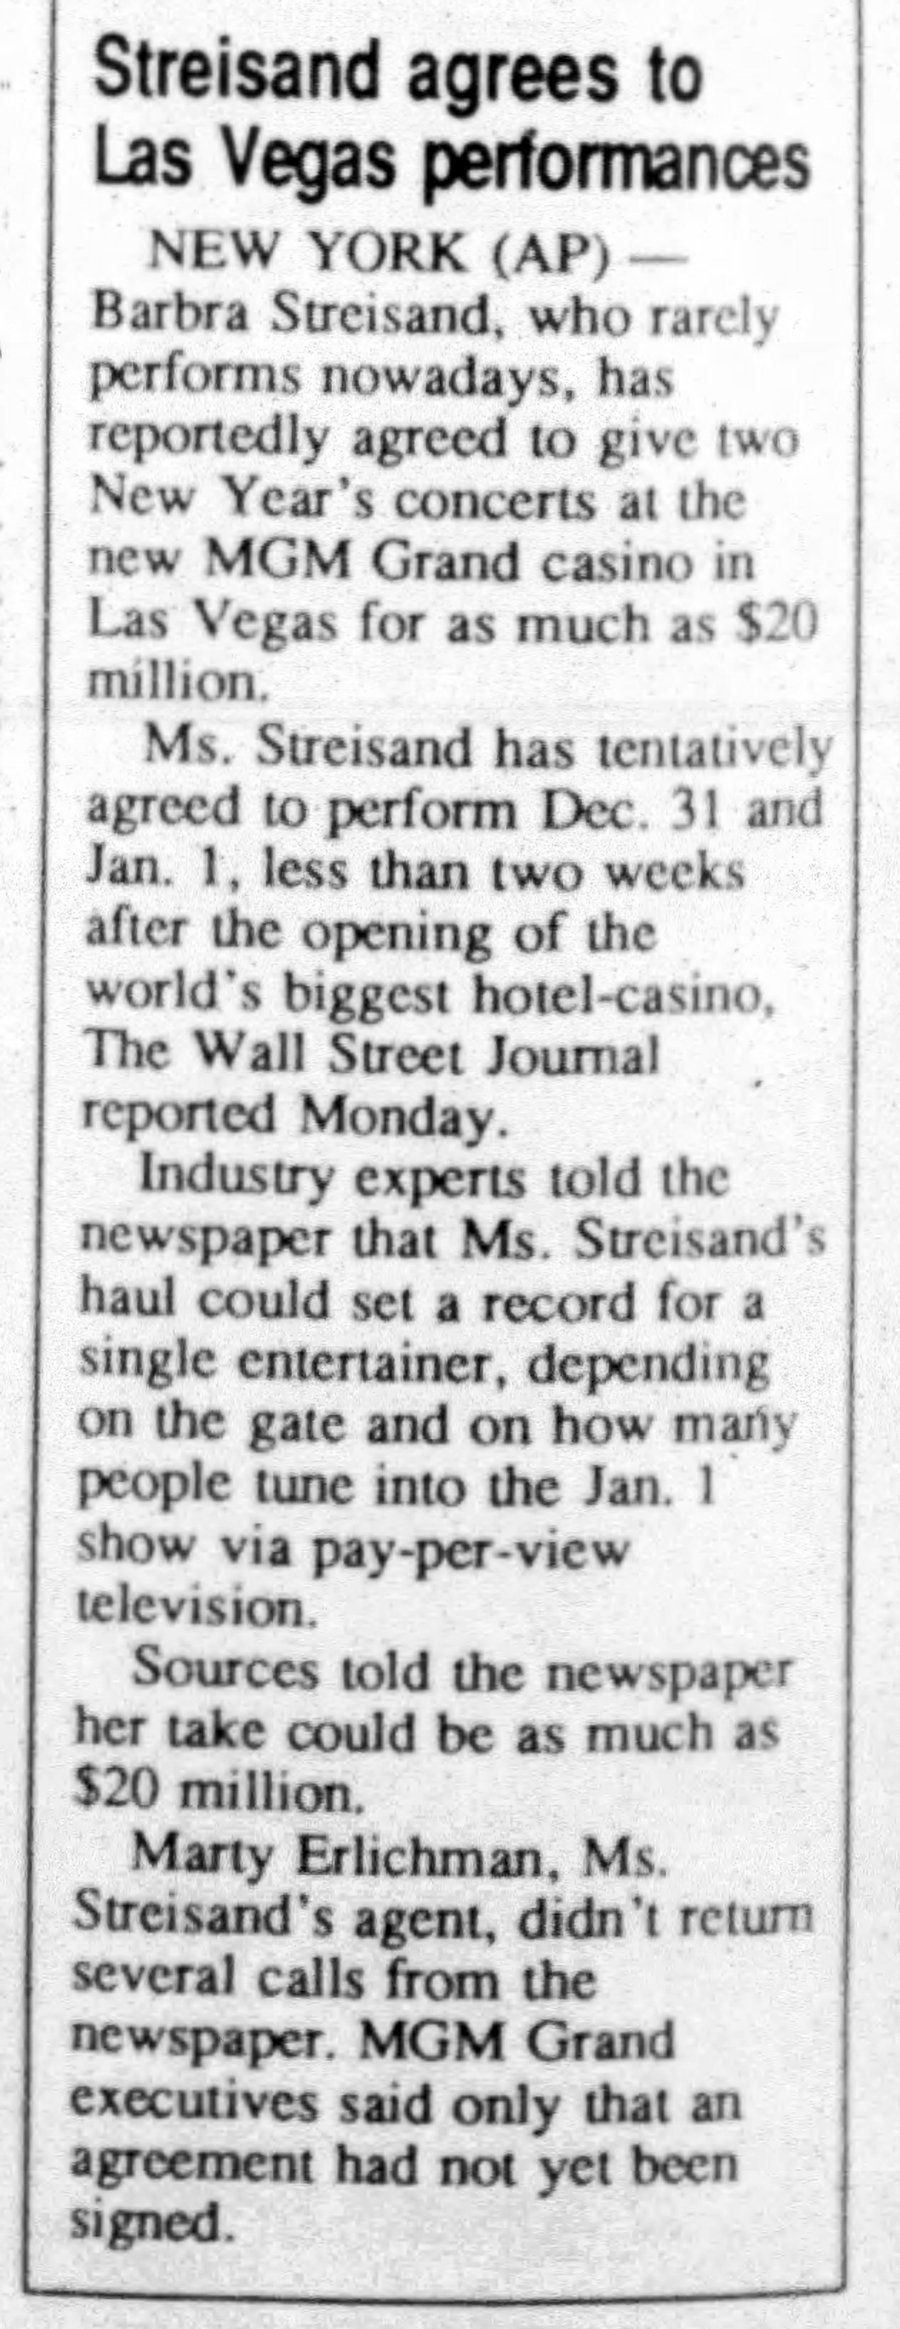 Newspaper article about Streisand's Las Vegas shows.